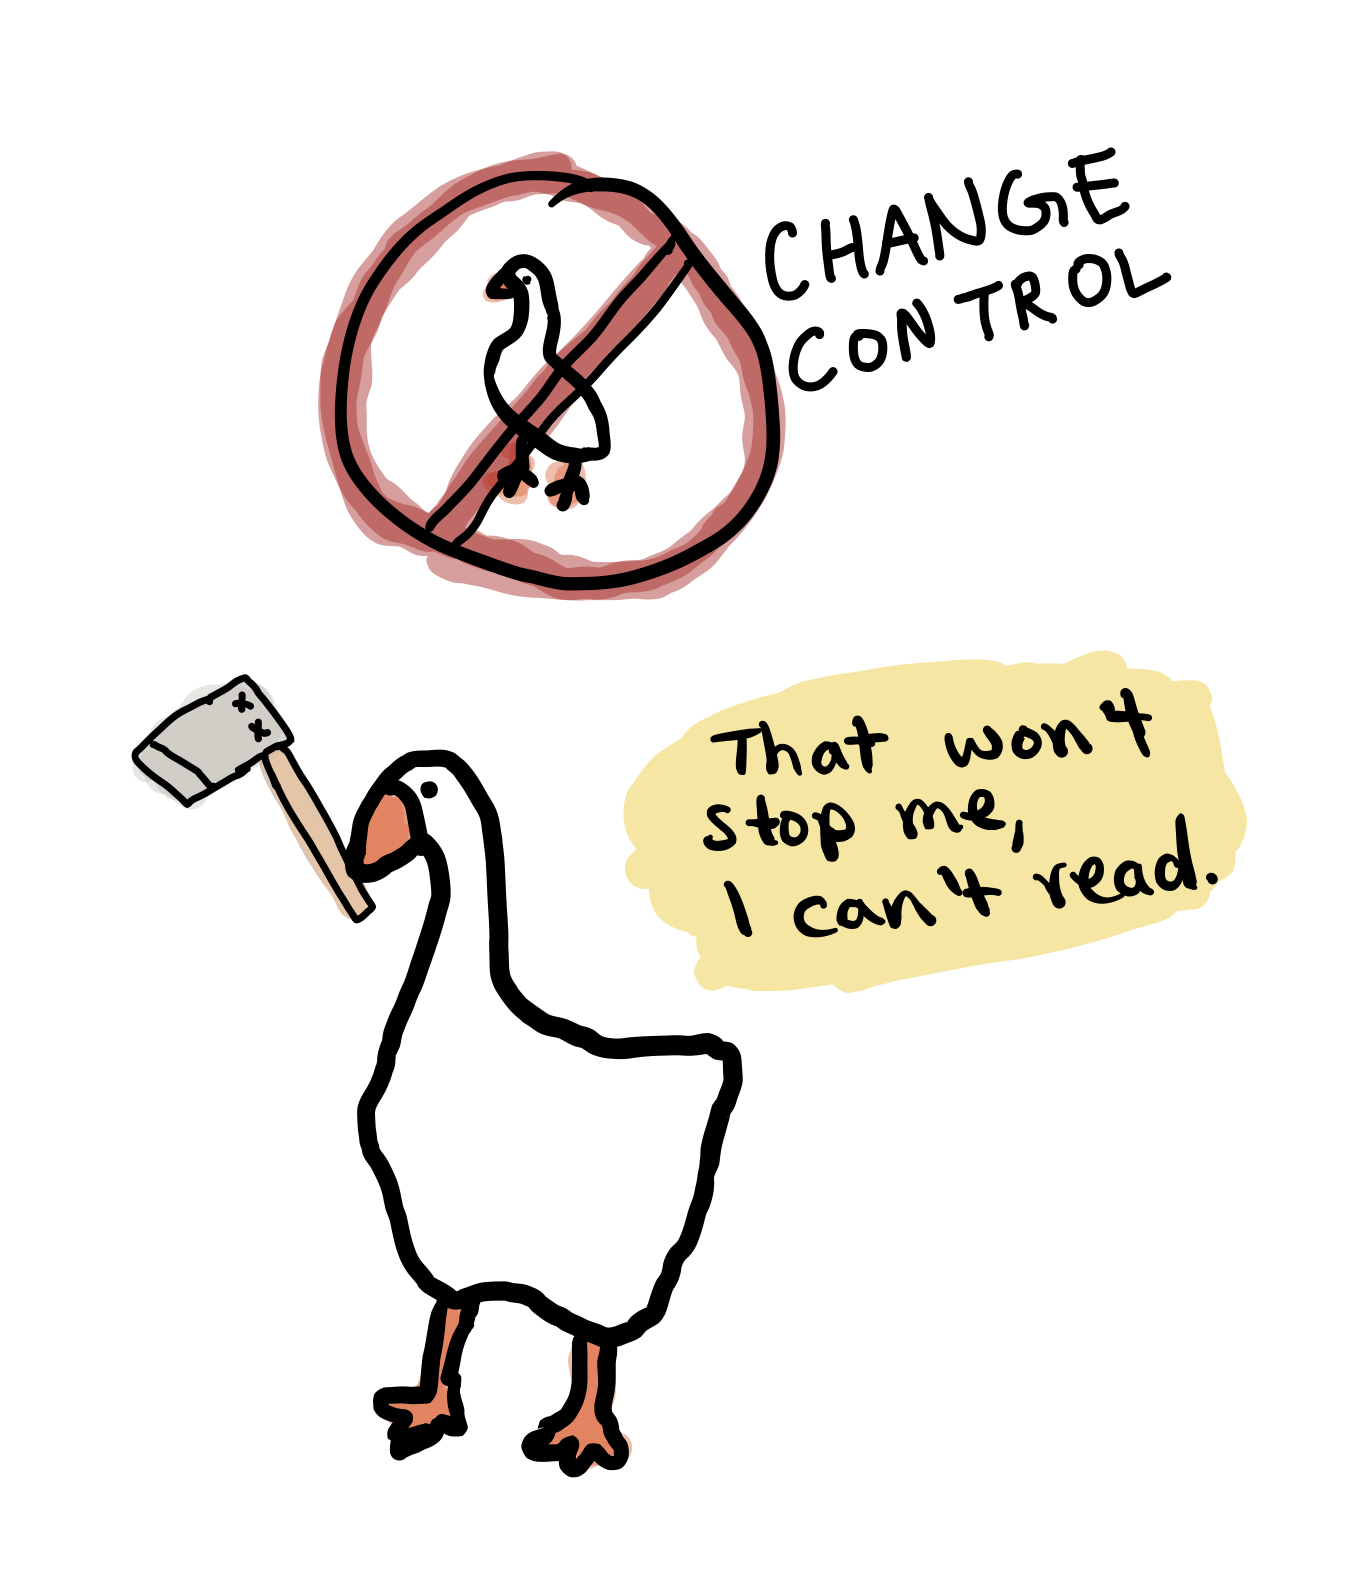 Image of a goose saying change control won't stop me, I can't read